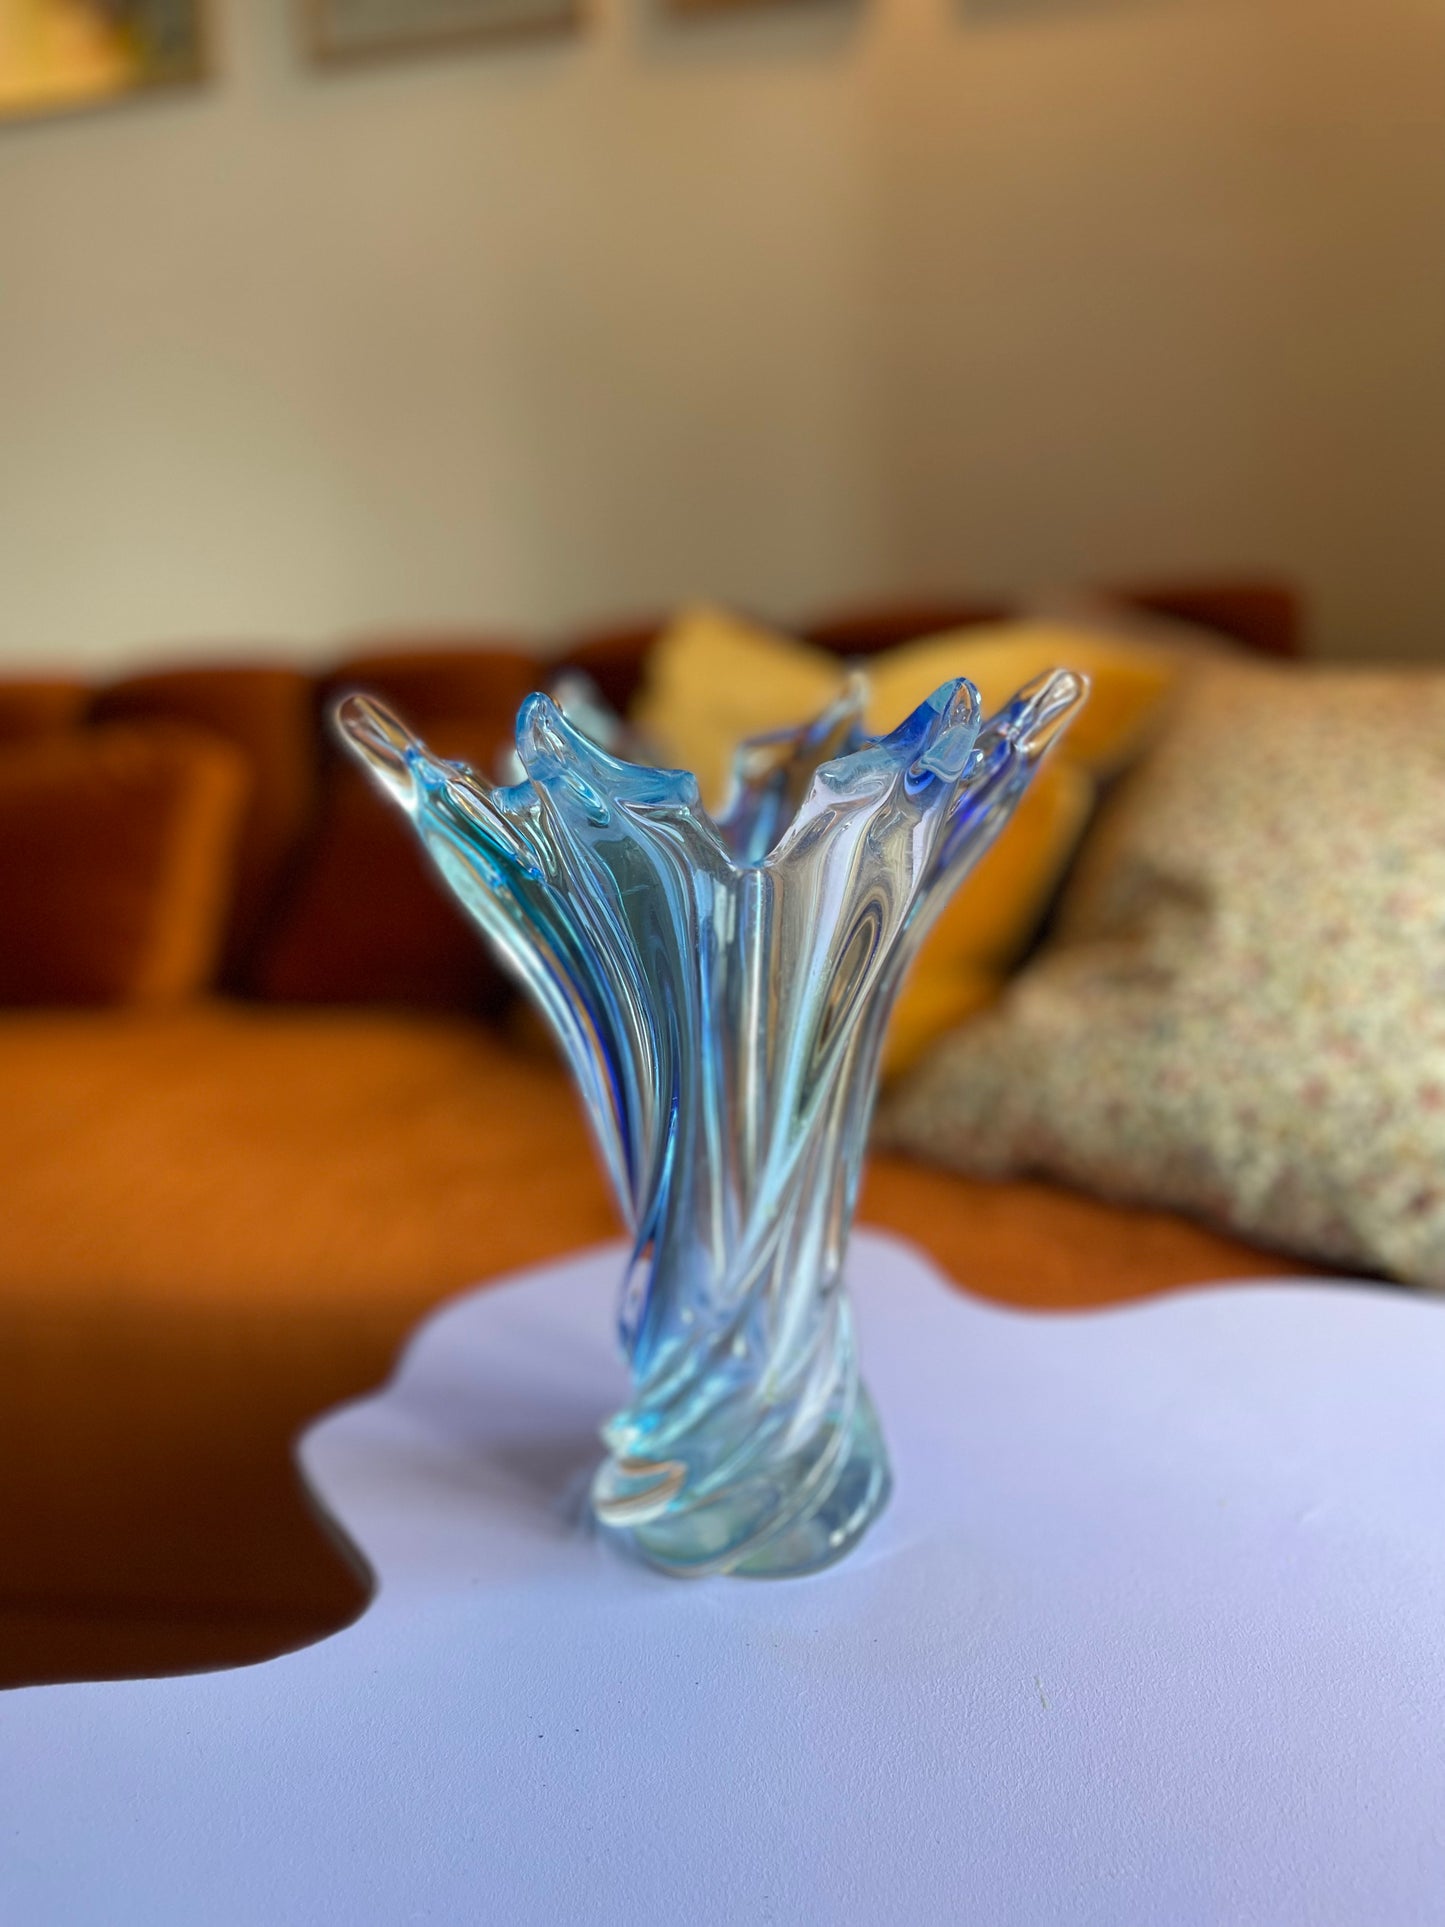 Vintage Murano blue glass vase with repair